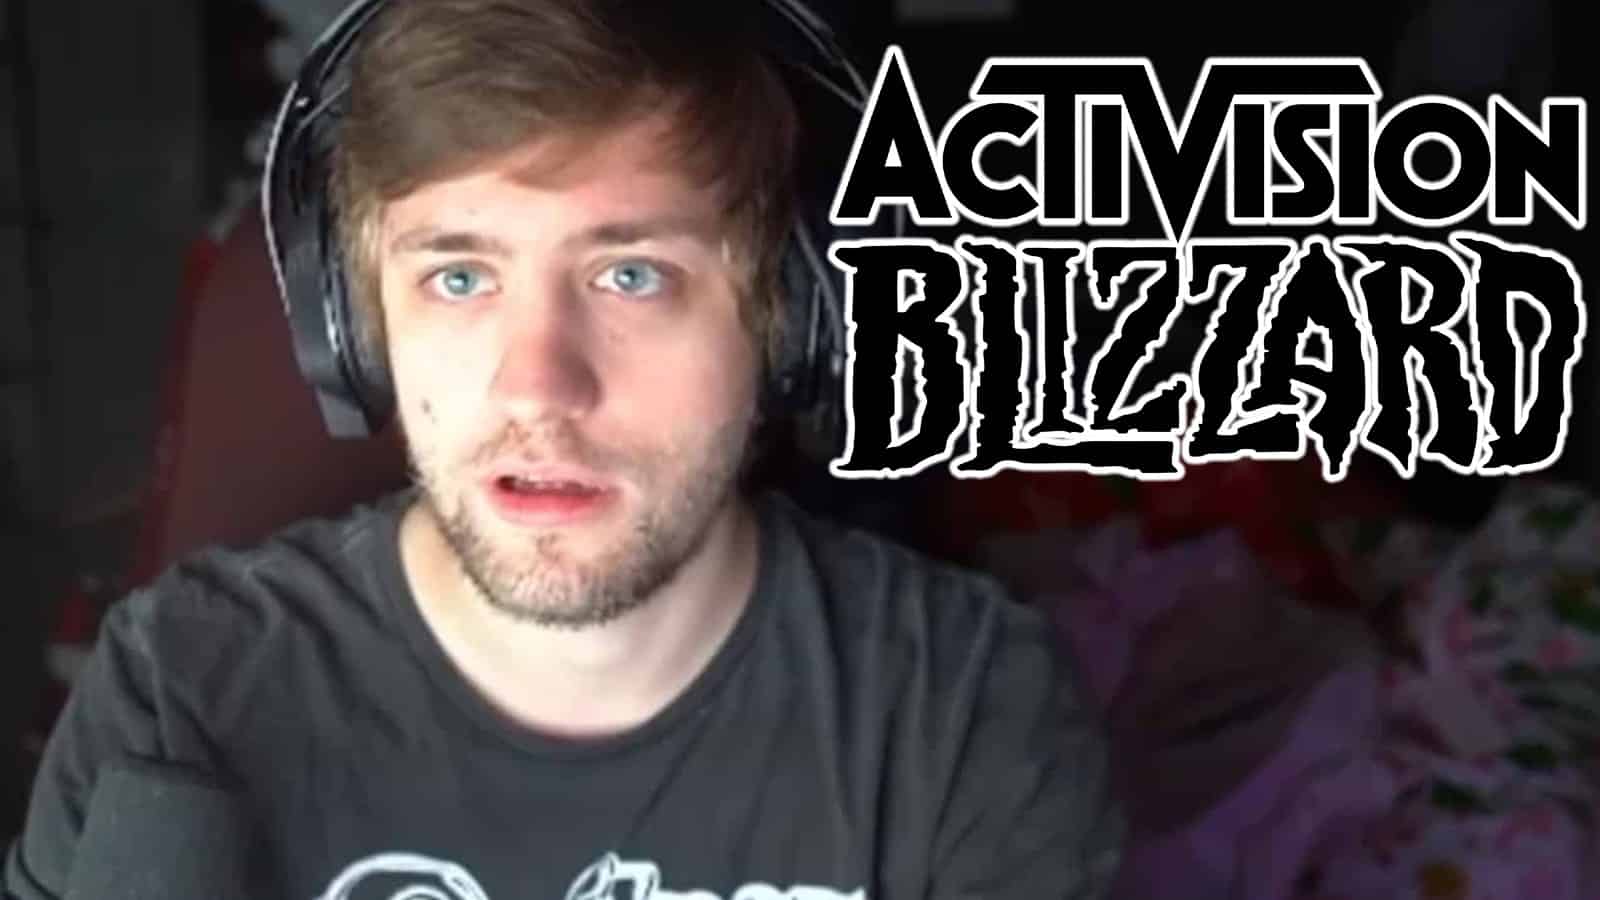 Sodapoppin streaming with Activision Blizzard logo